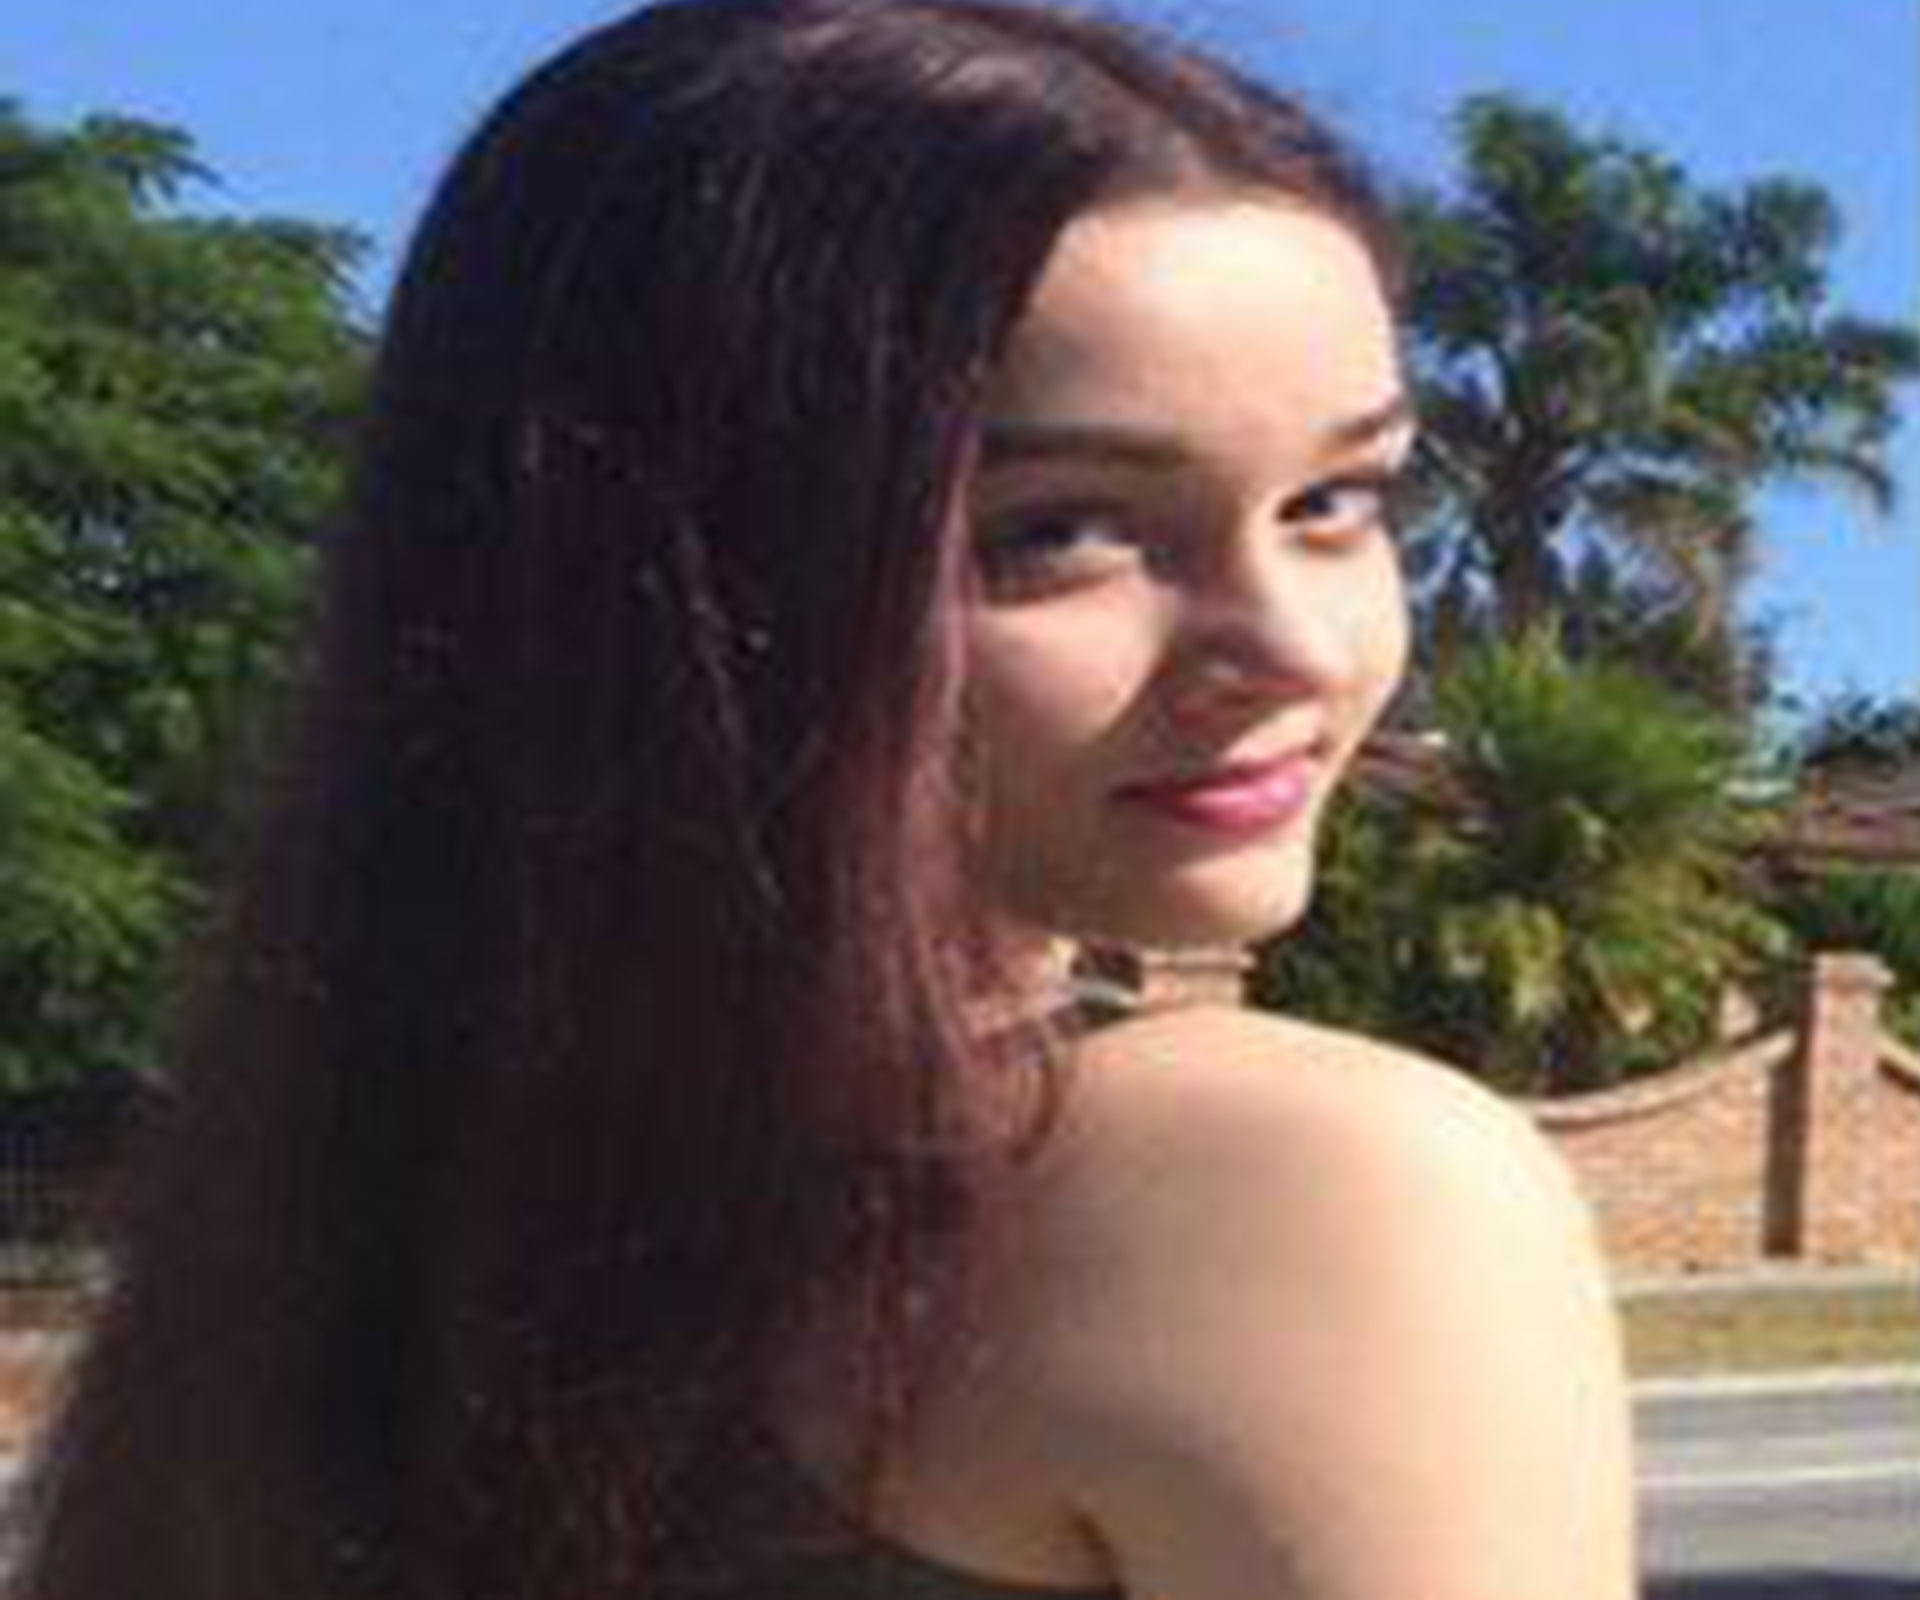 Police search for missing Perth 14-year-old